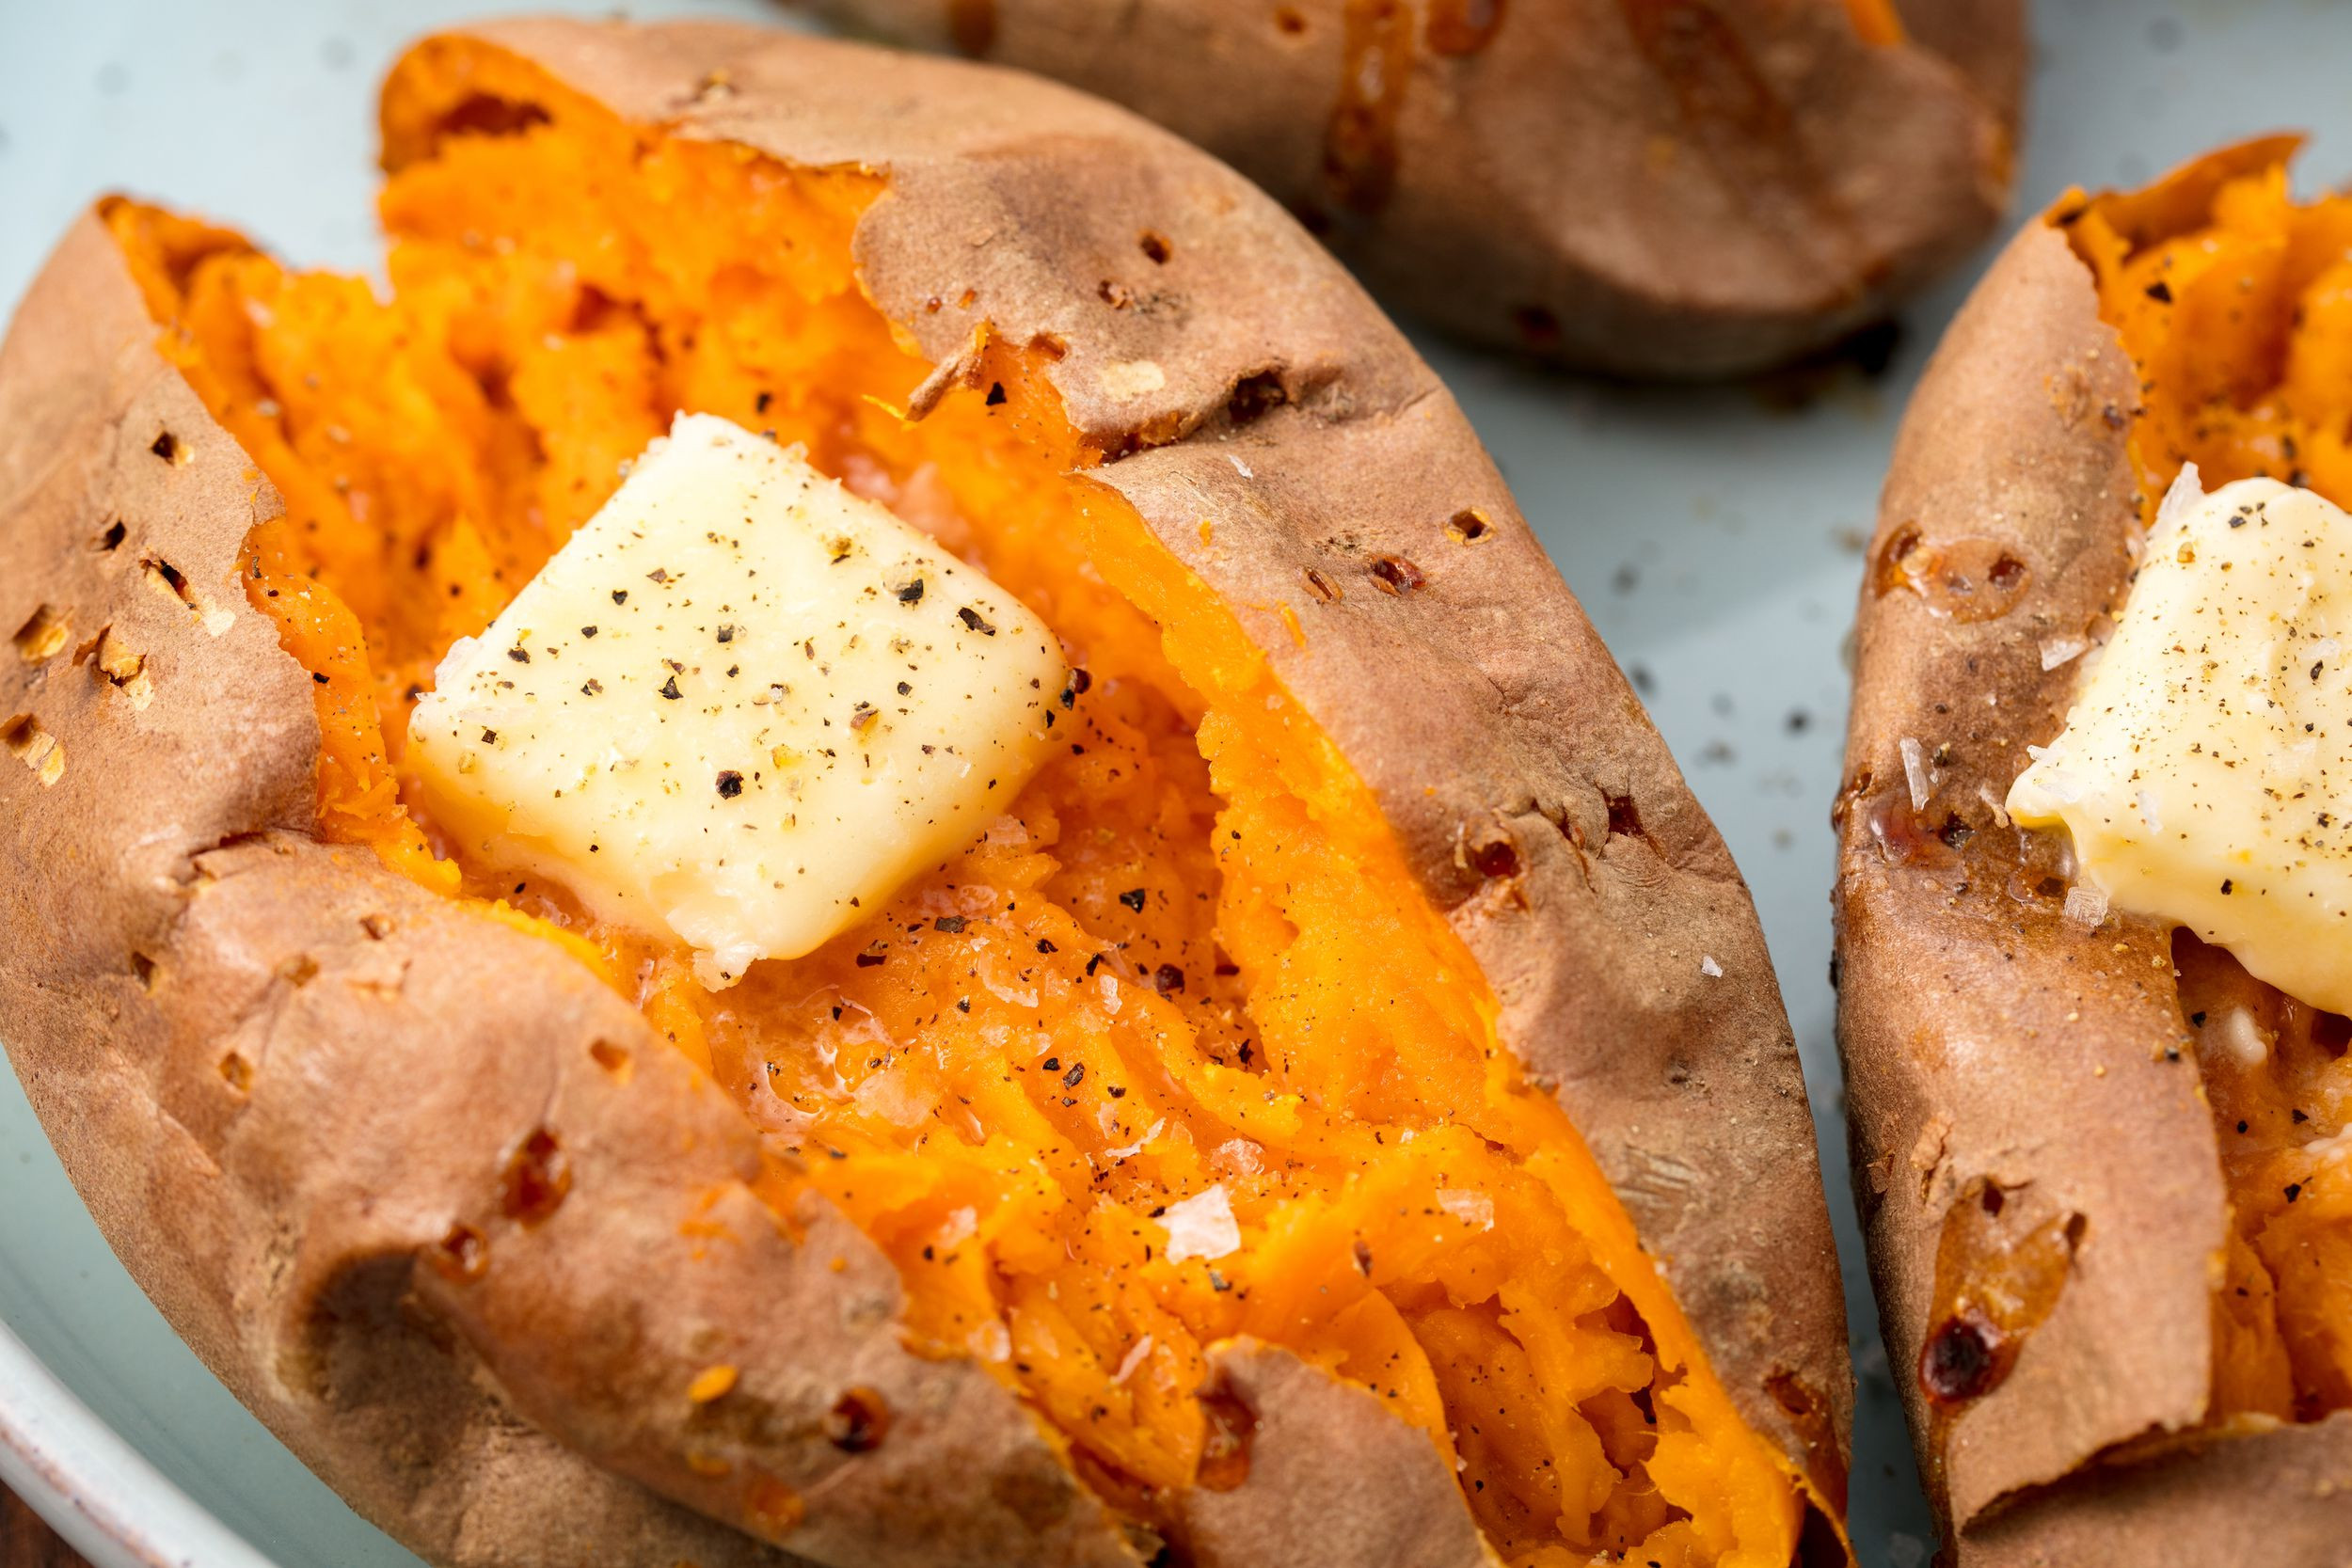 Cook Sweet Potato In Microwave
 How Long To Microwave A Sweet Potato and Achieve The